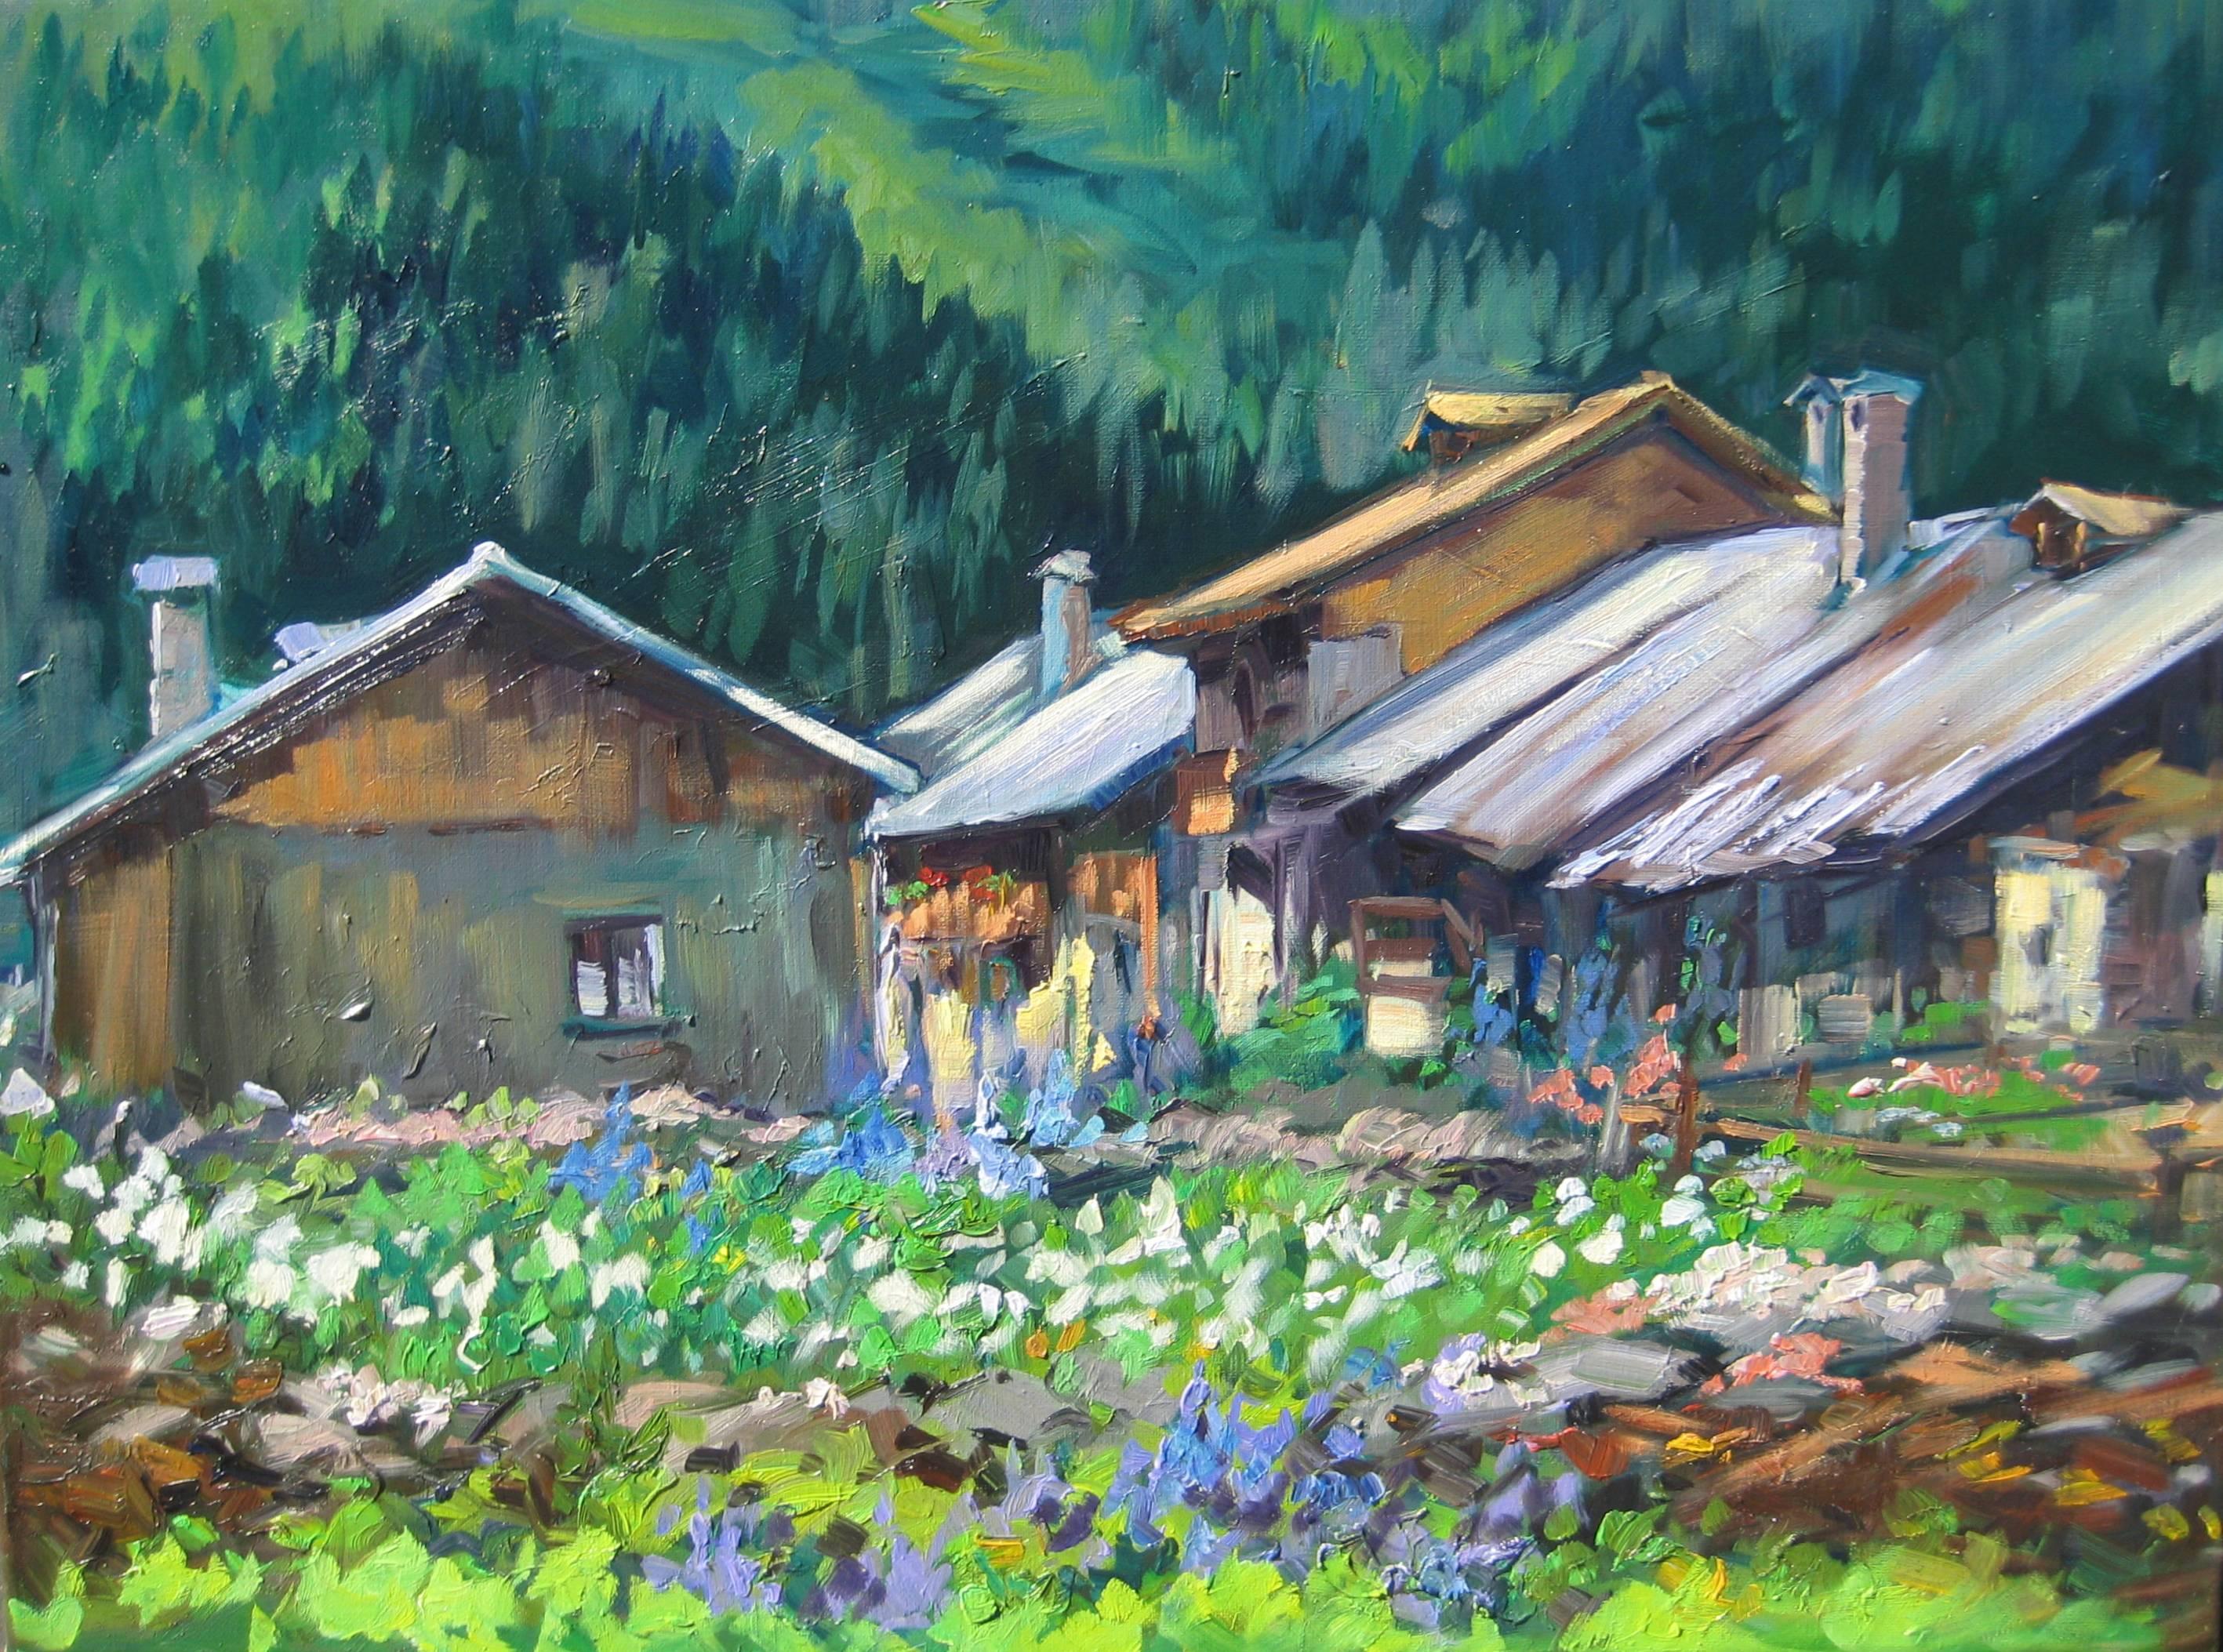 Maria Bertrán Landscape Painting - "Garden In Bloom, Champagny"  Oil Painting in the French Alps by Maria Bertran